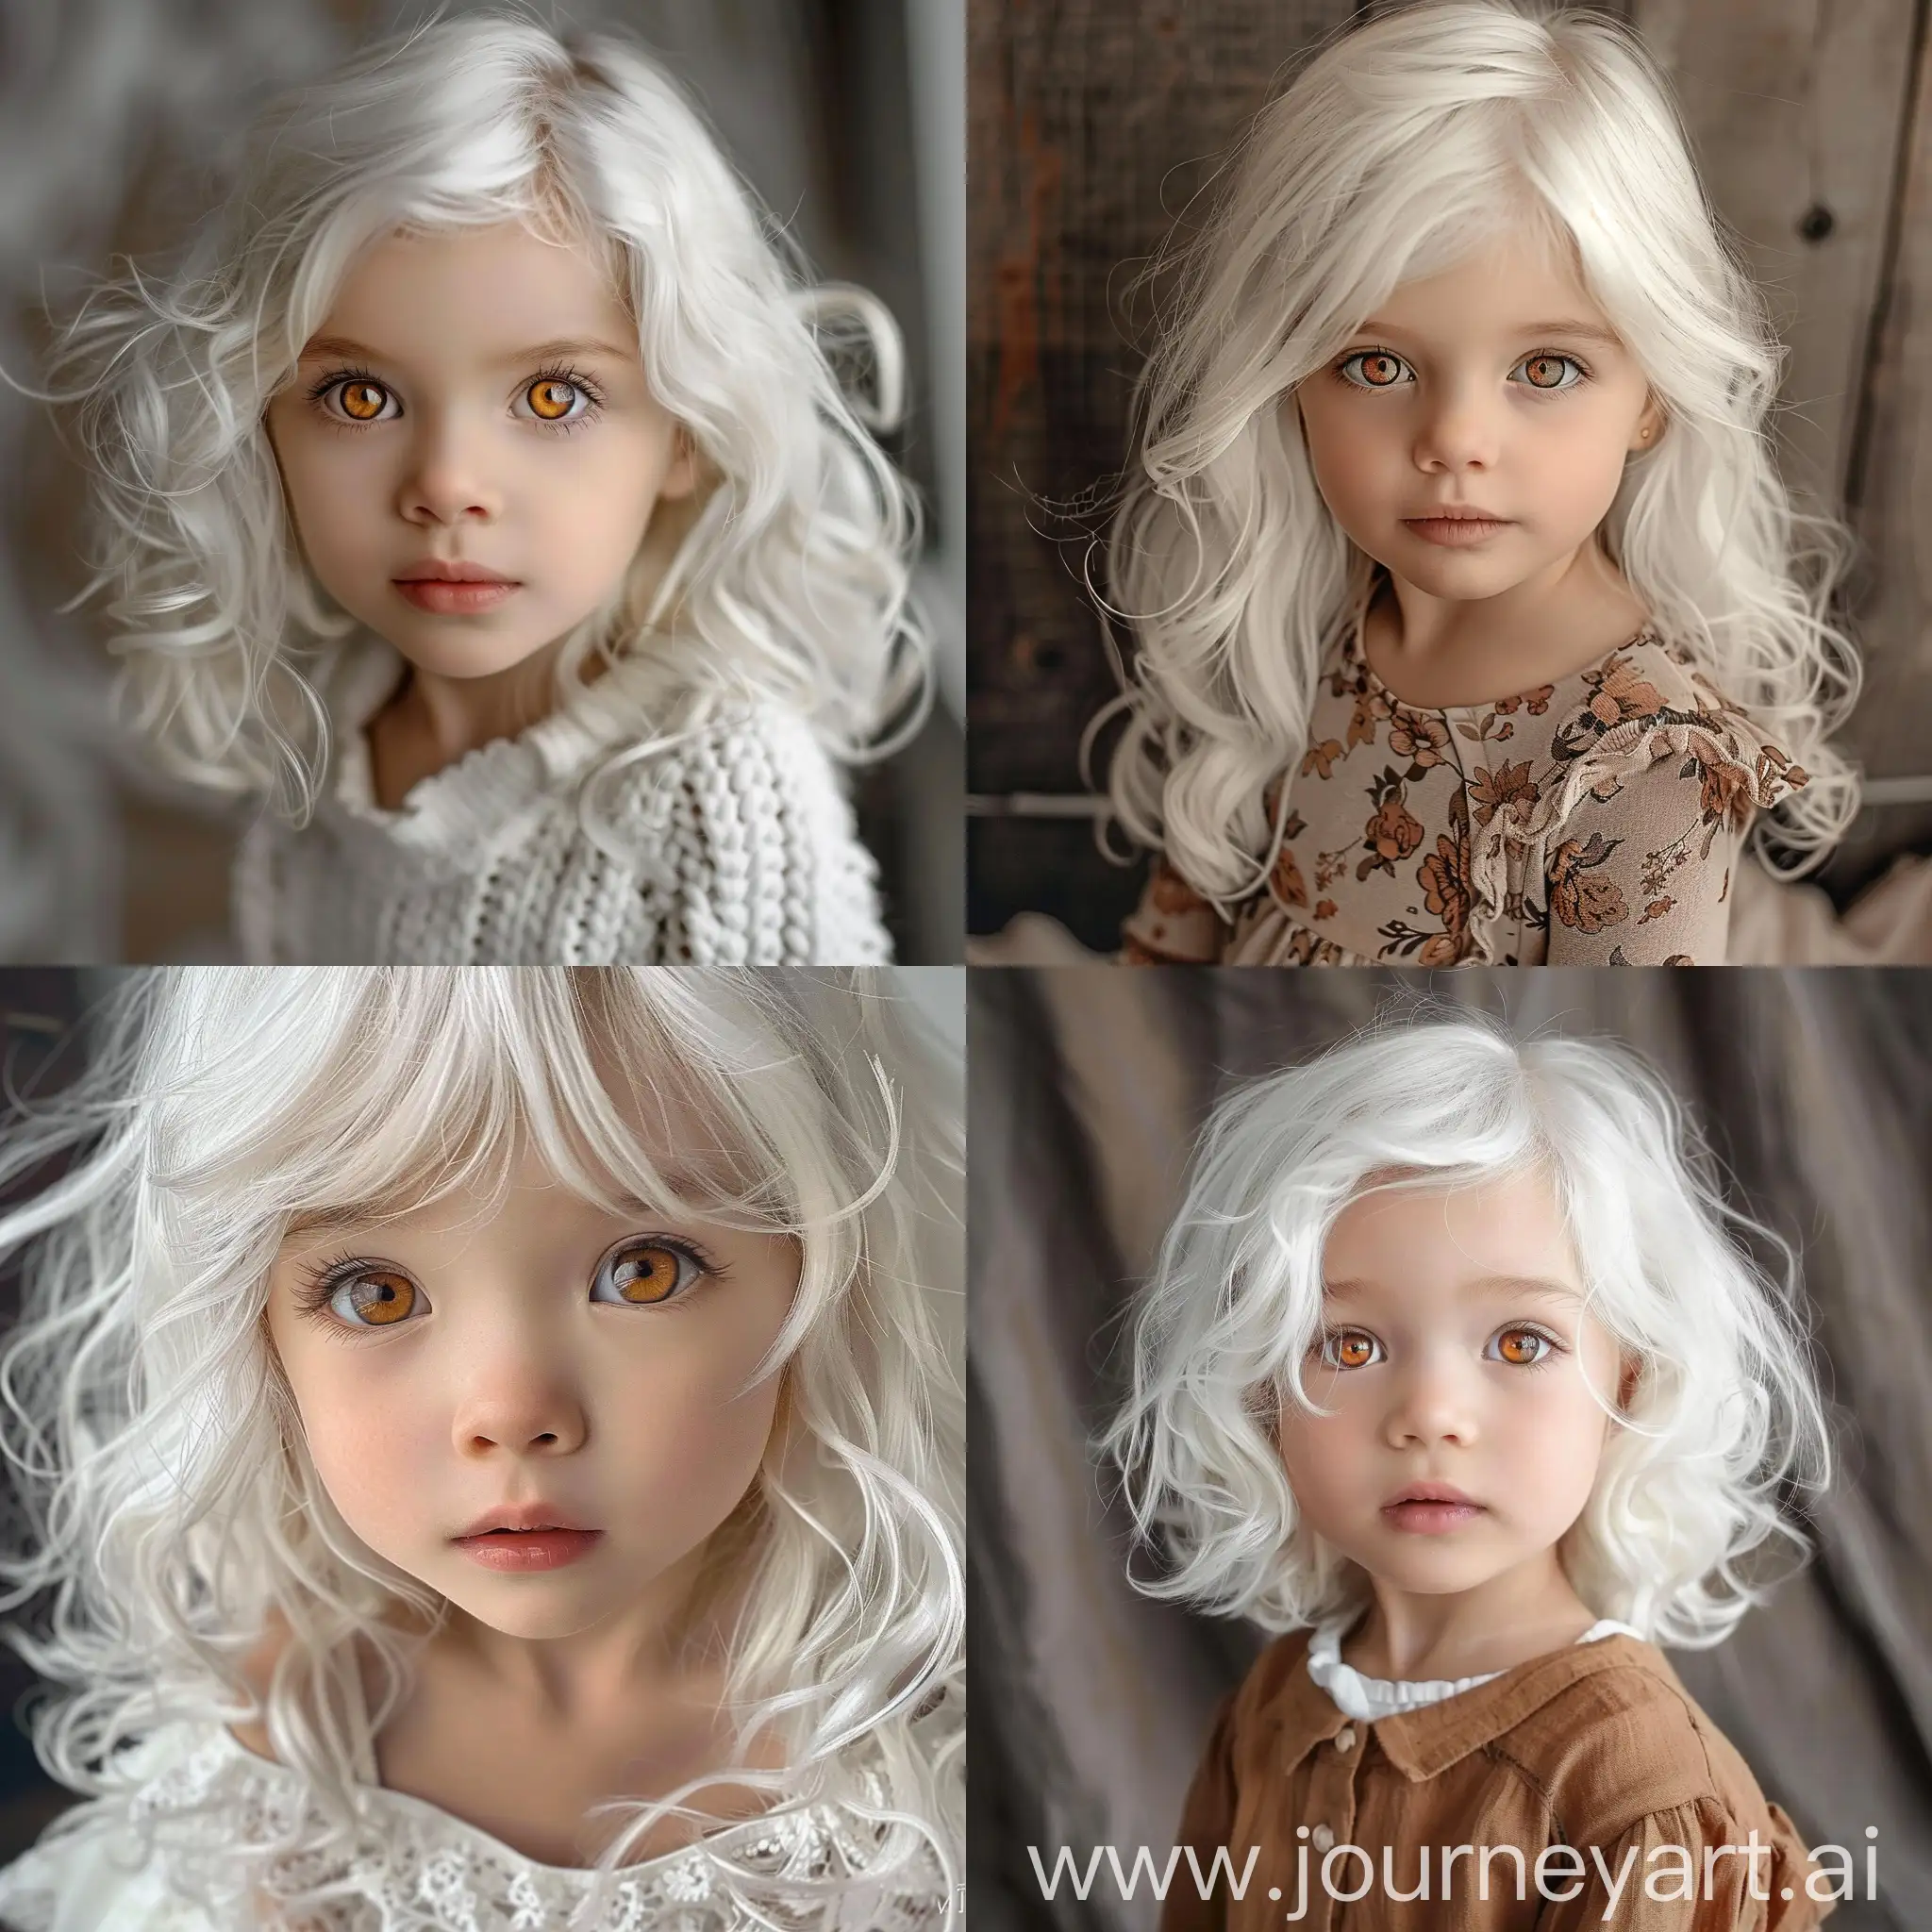 Adorable-Little-Girl-with-White-Hair-and-AmberColored-Pupils-Standing-Tall